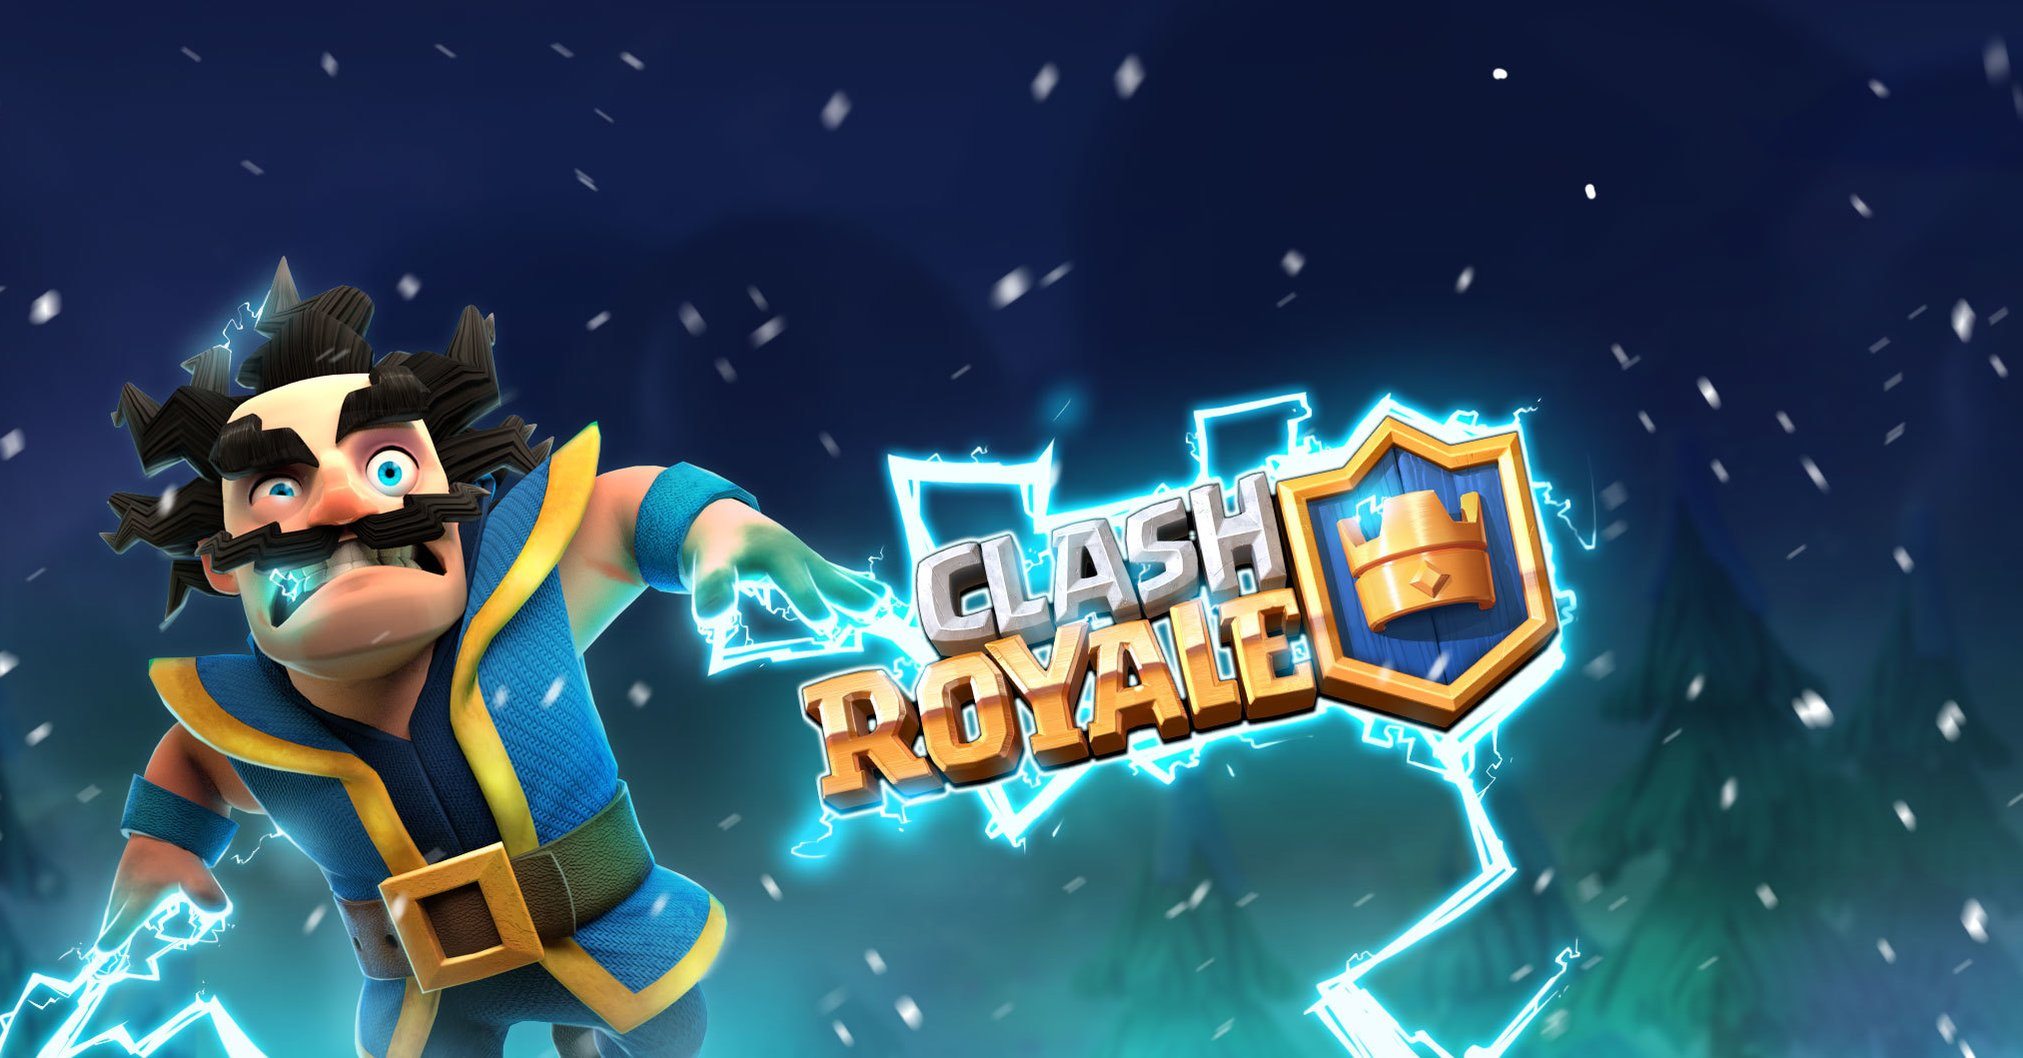 Beautiful Clash Royale Wallpaper Electro Wizard With